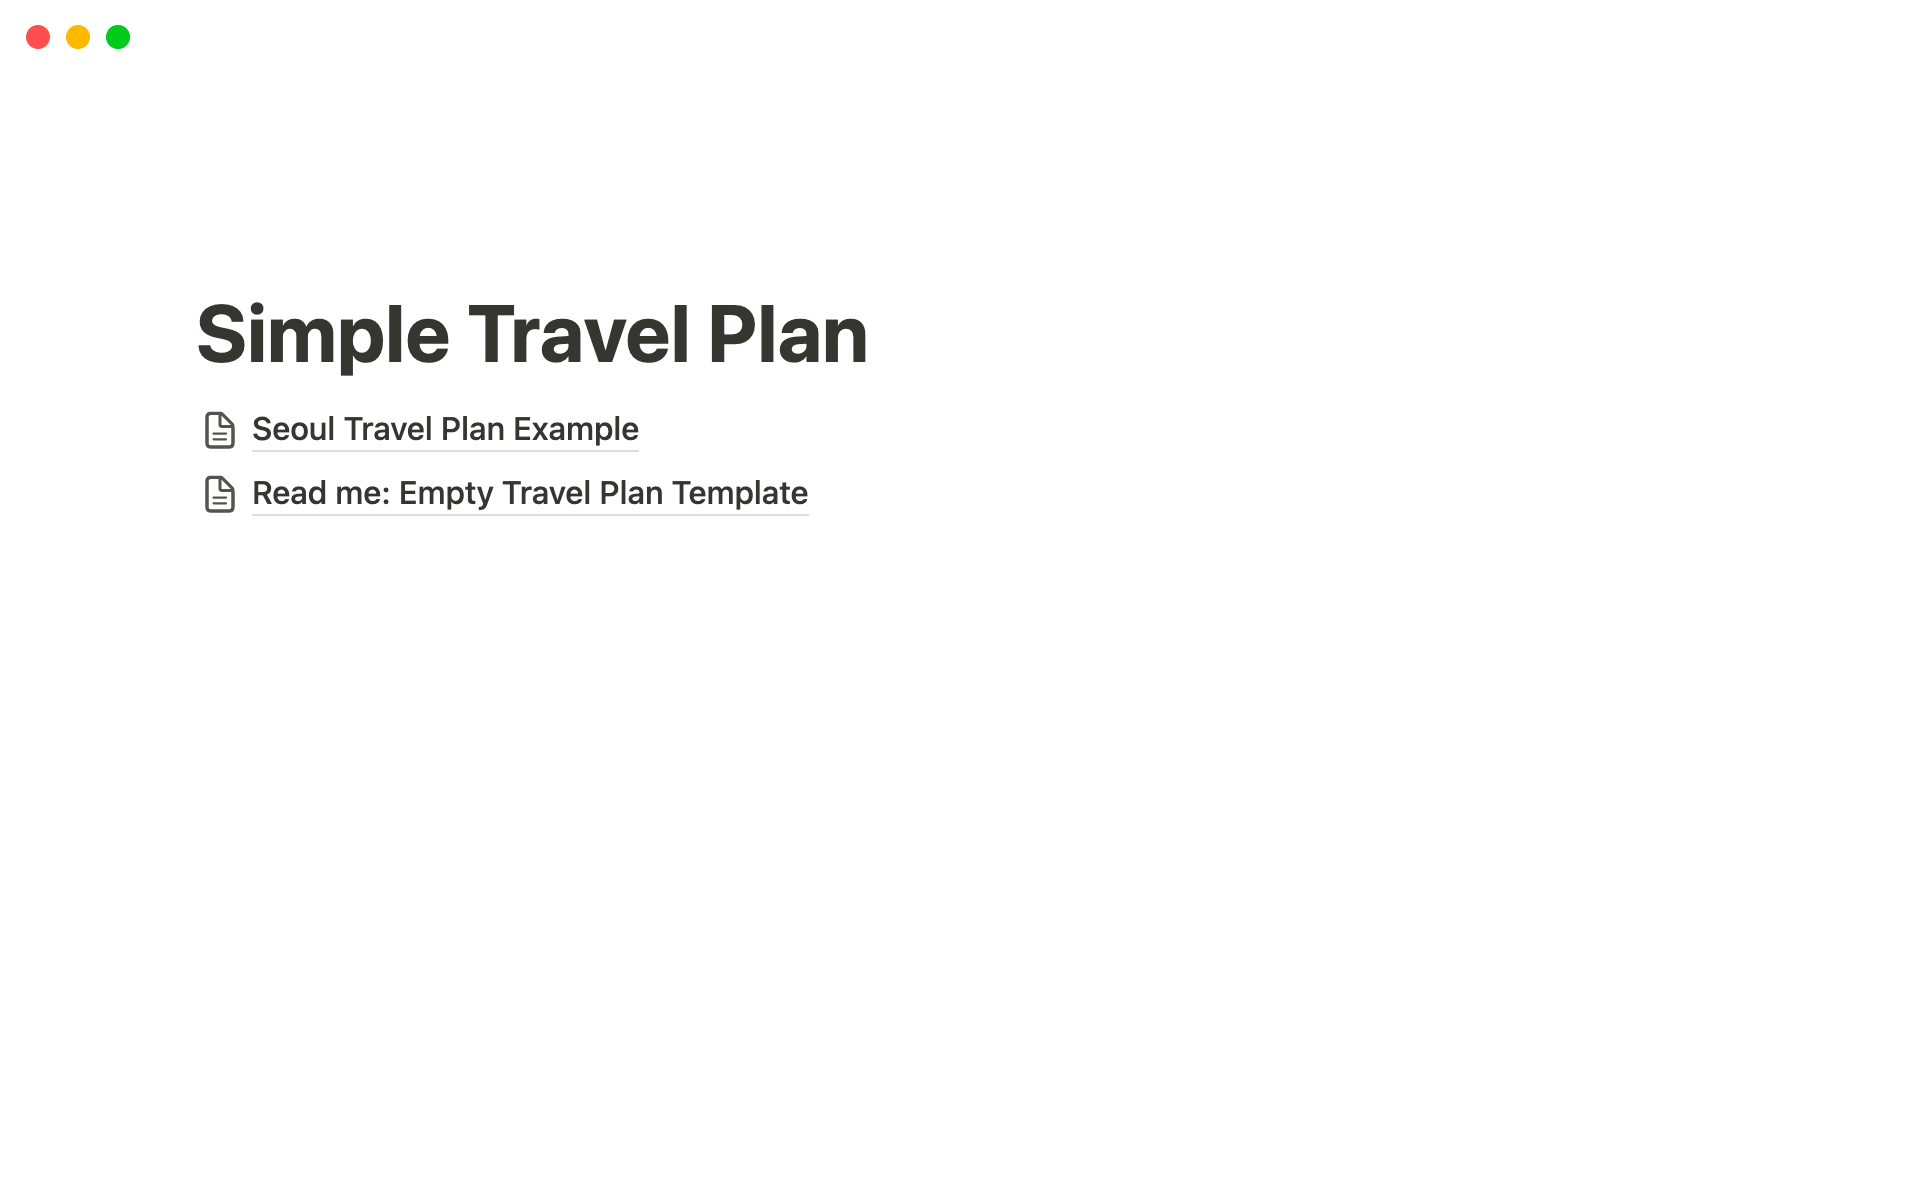 This is the simple travel plan that you can use for your next trip.